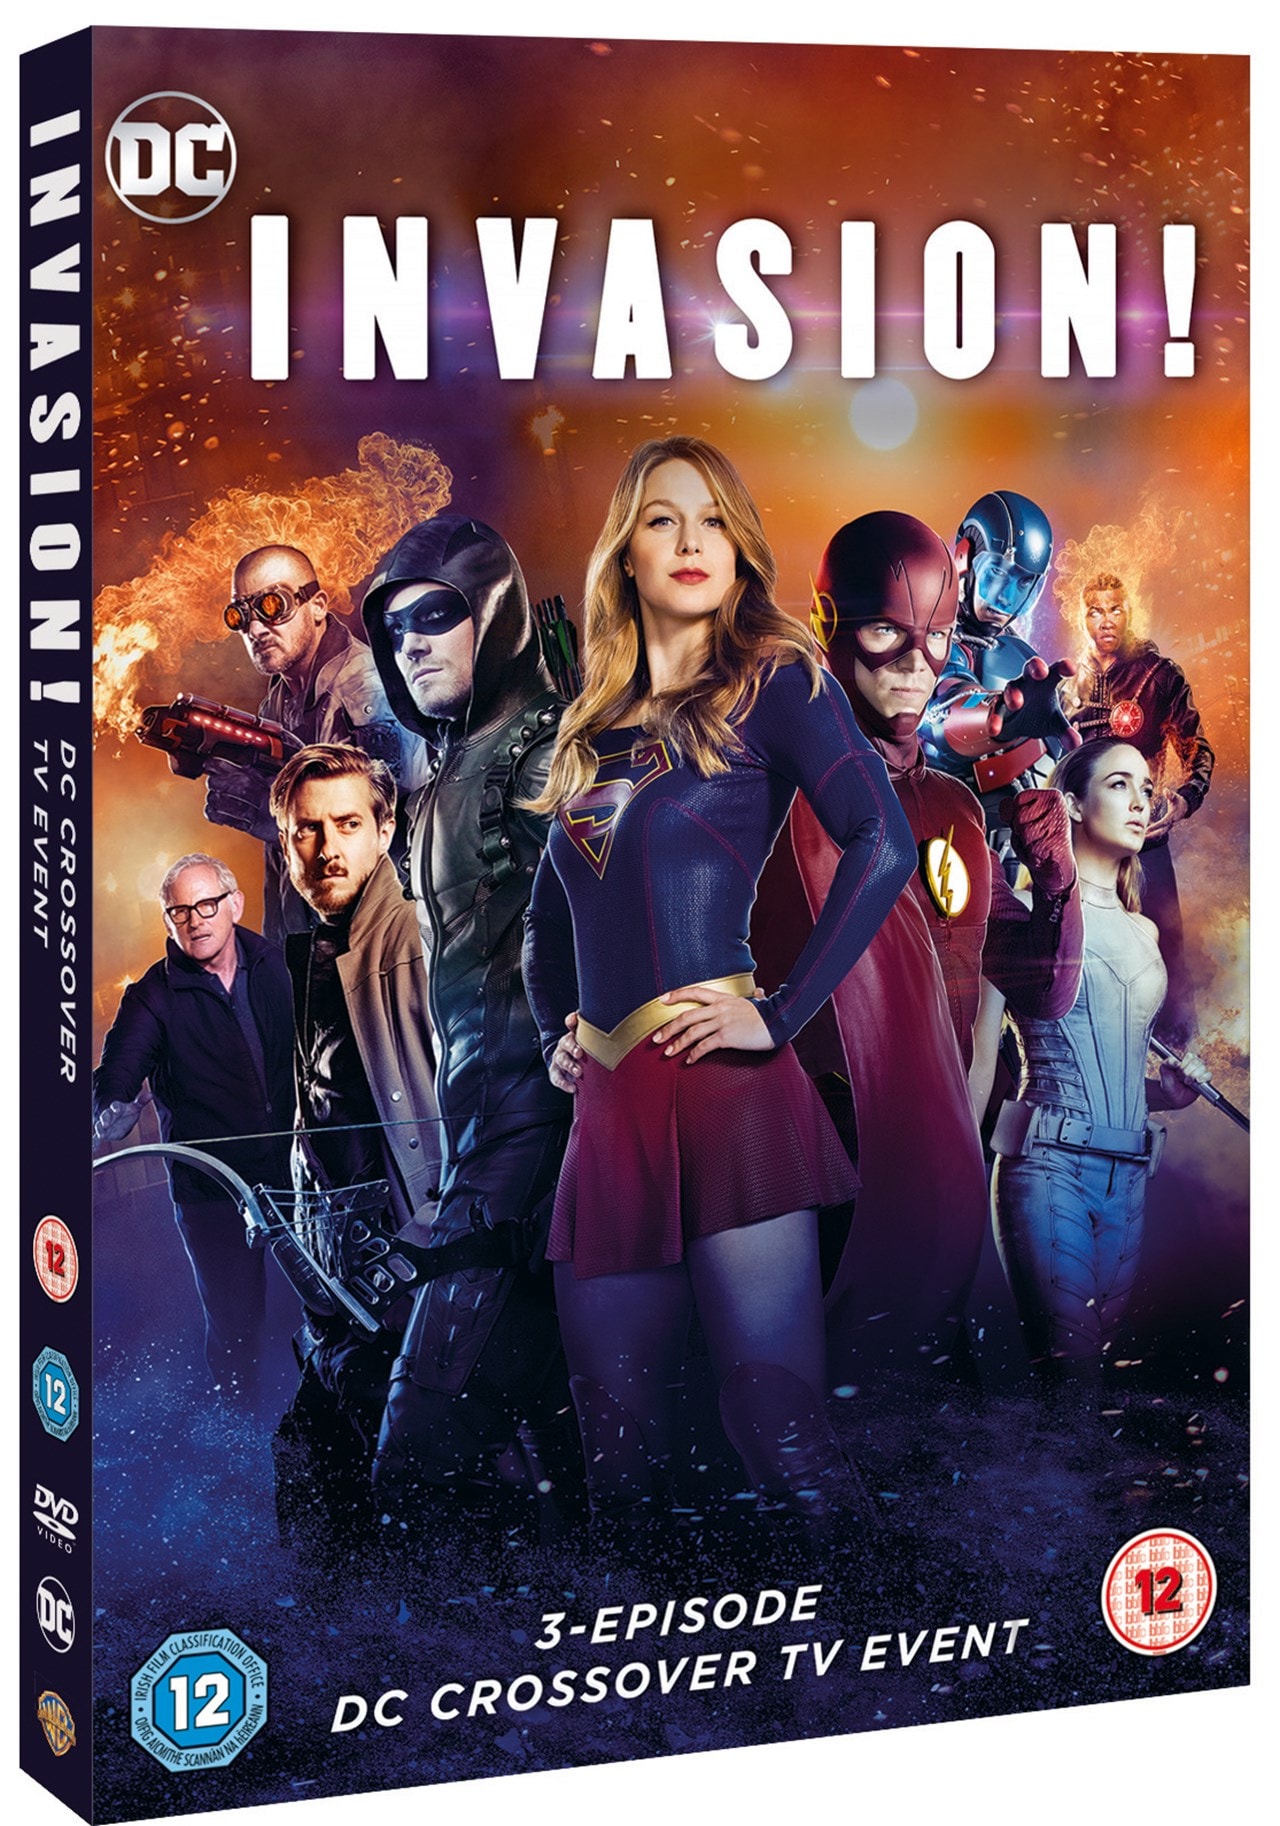 Invasion Dc Crossover Dvd Free Shipping Over £20 Hmv Store 2168